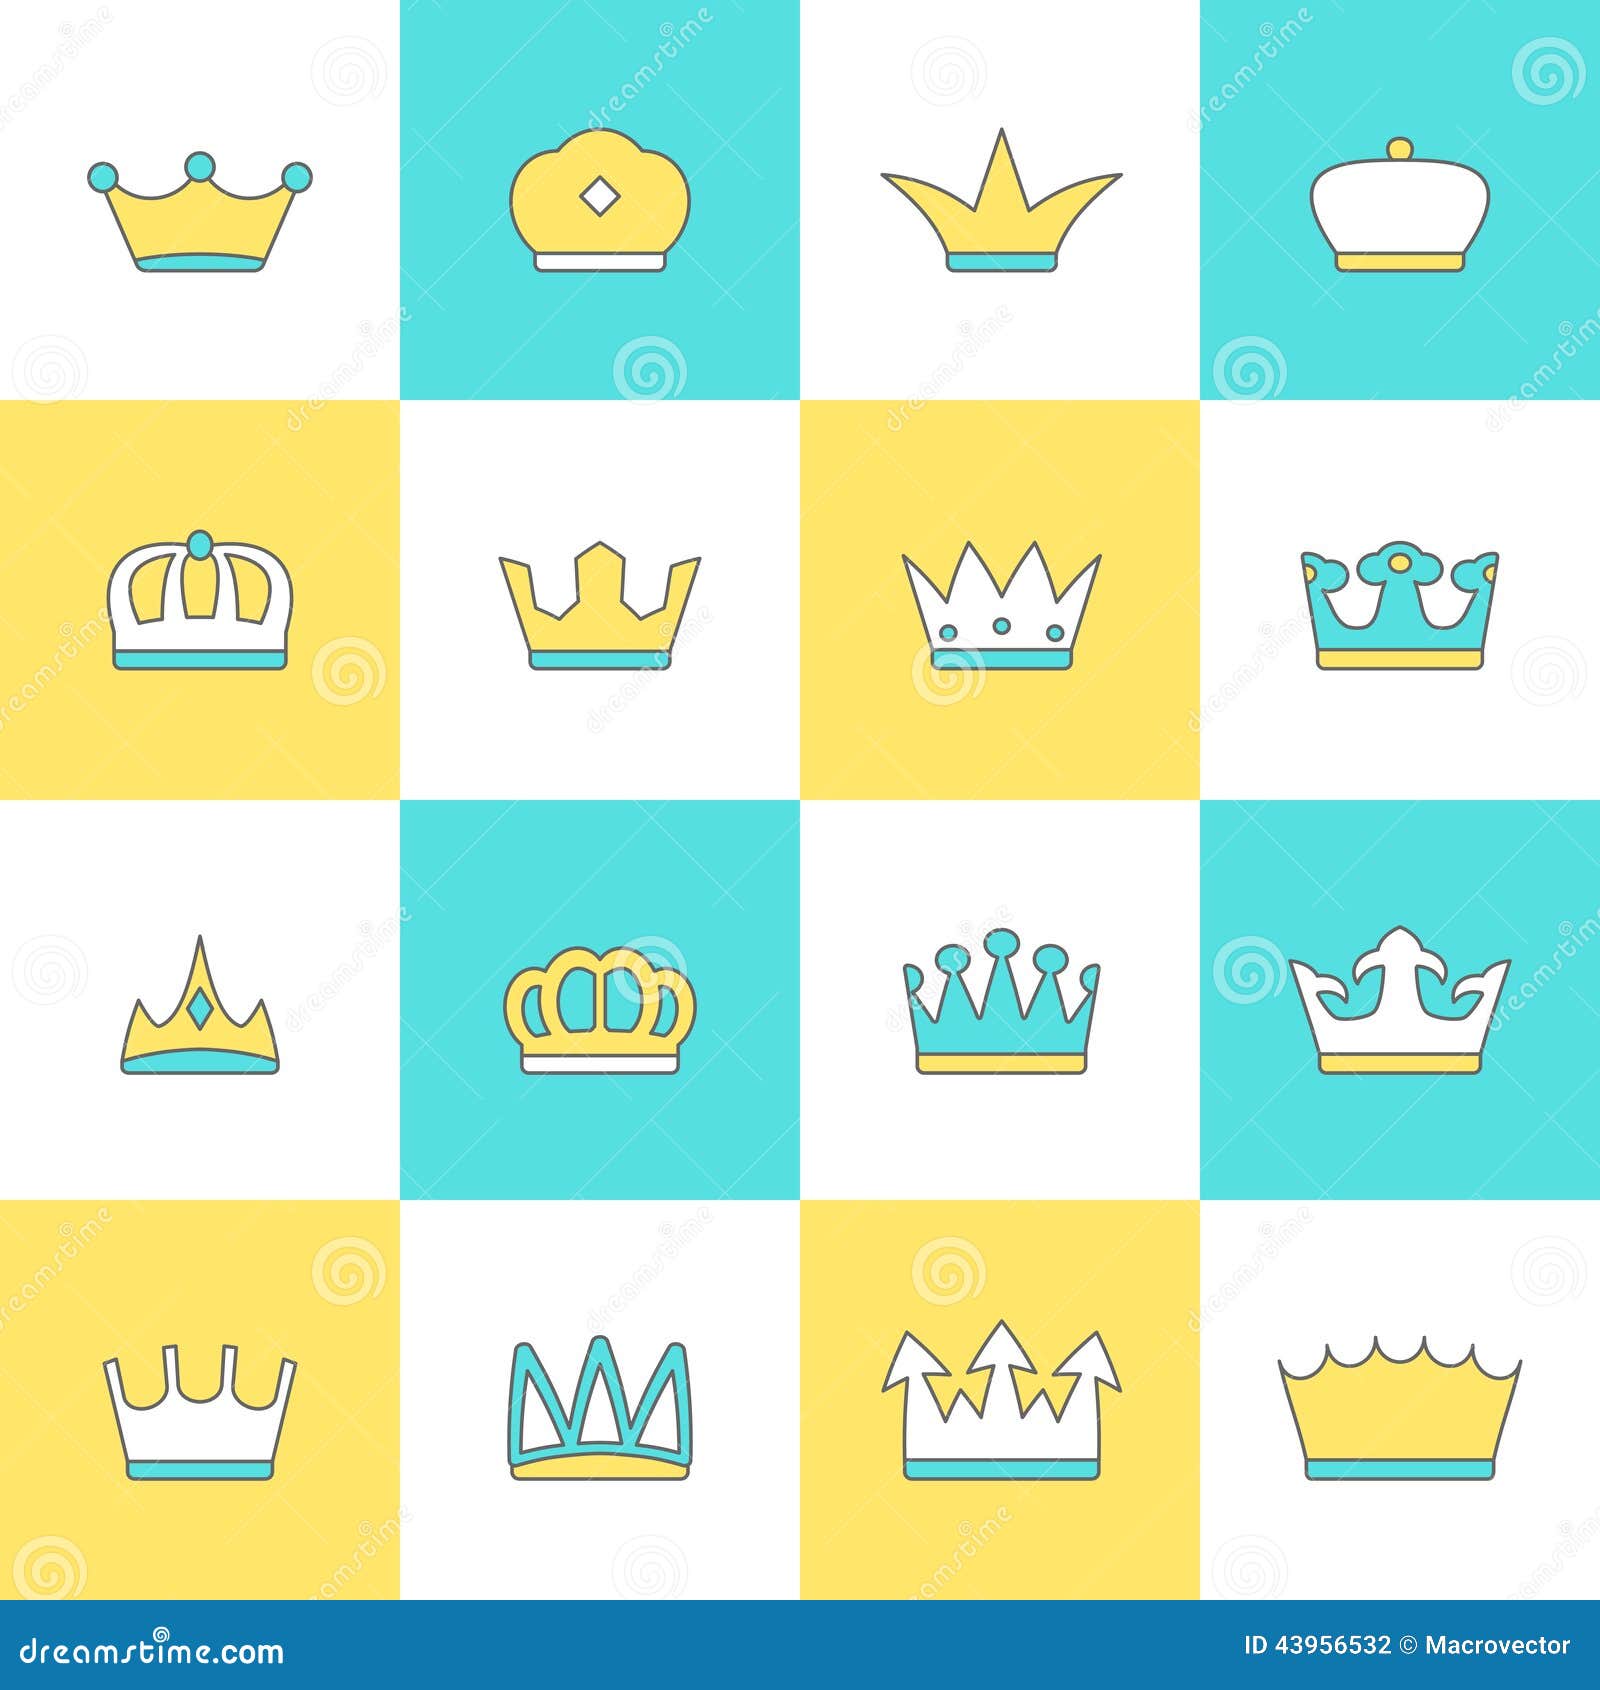 Crown icon set stock vector. Illustration of network - 43956532